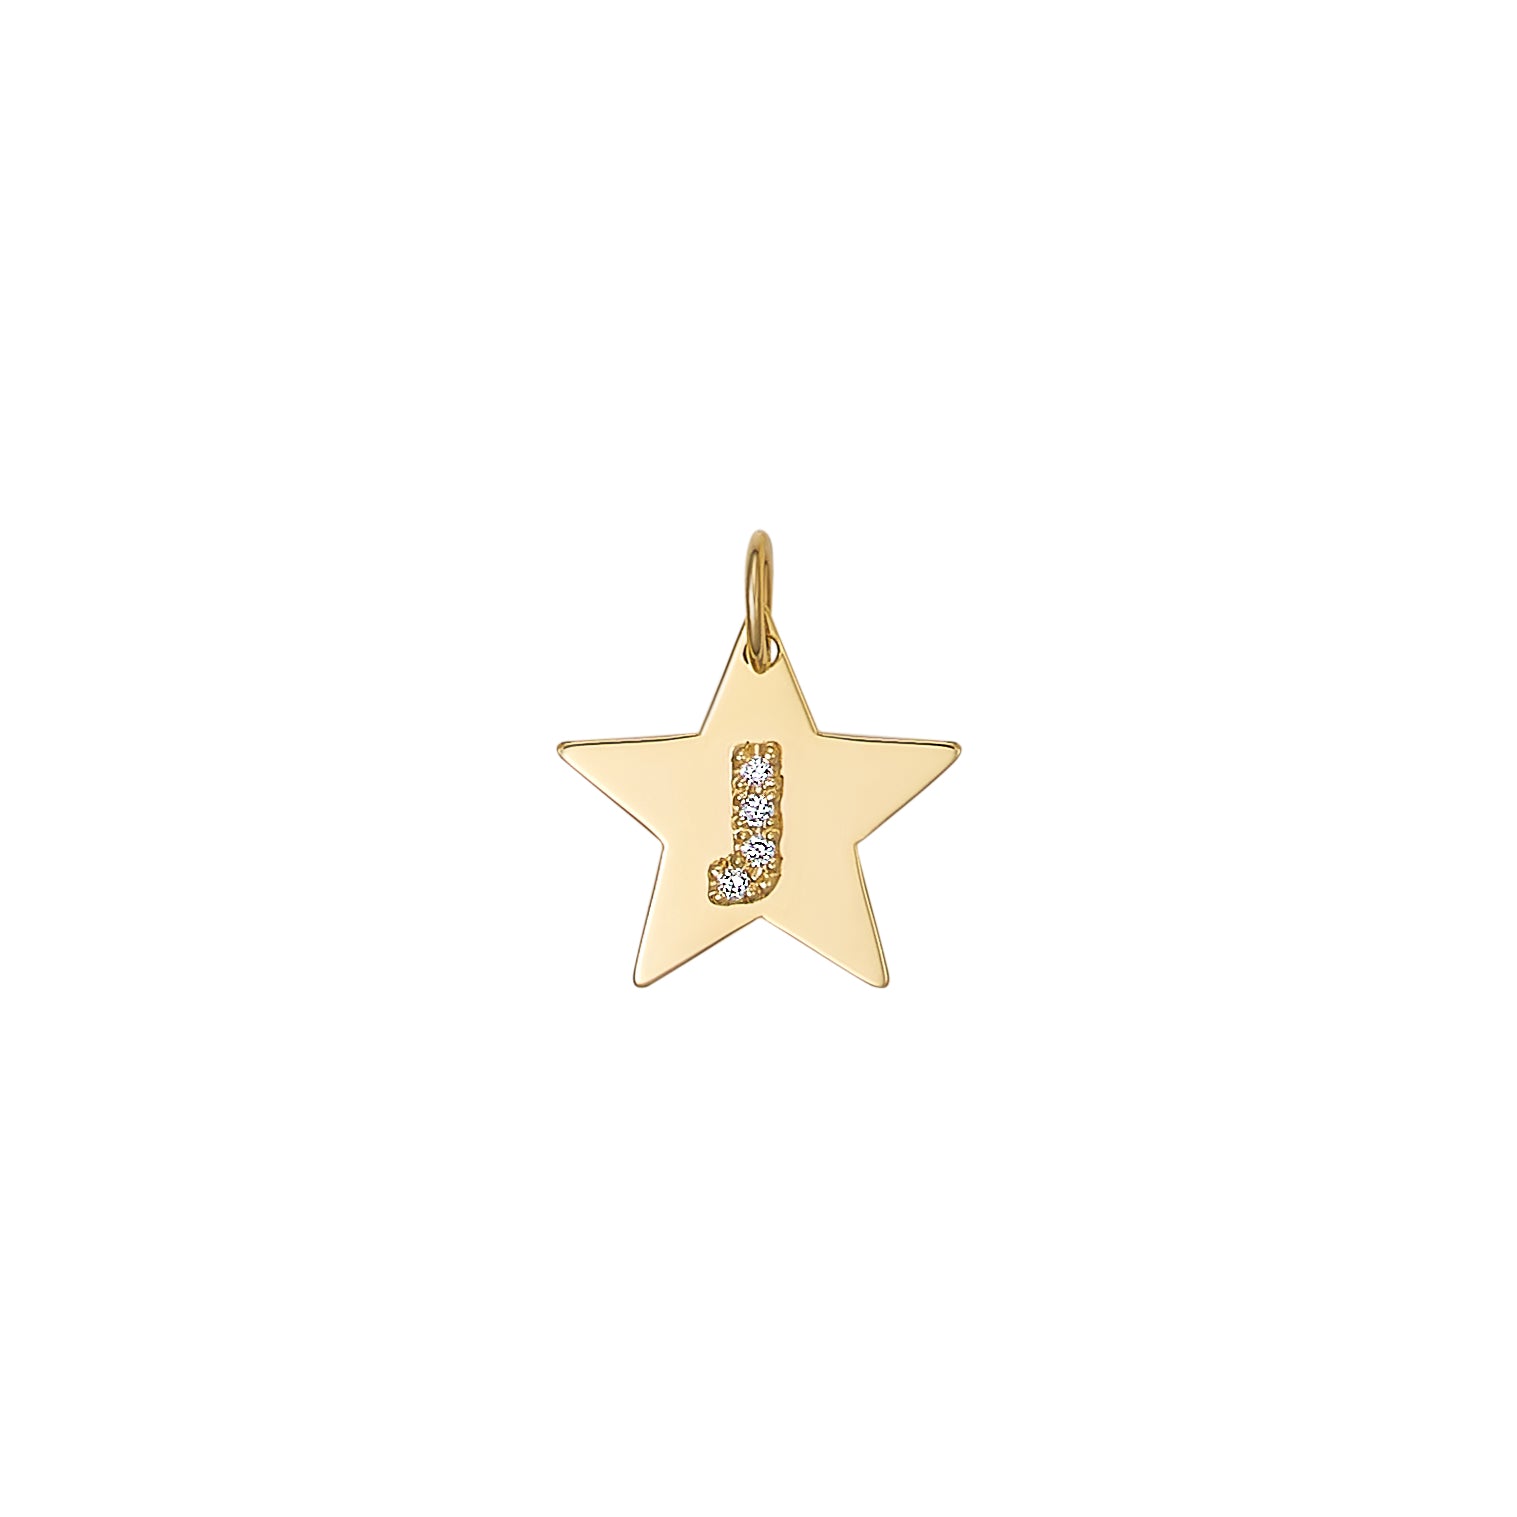 Star Charm With Raised Letters